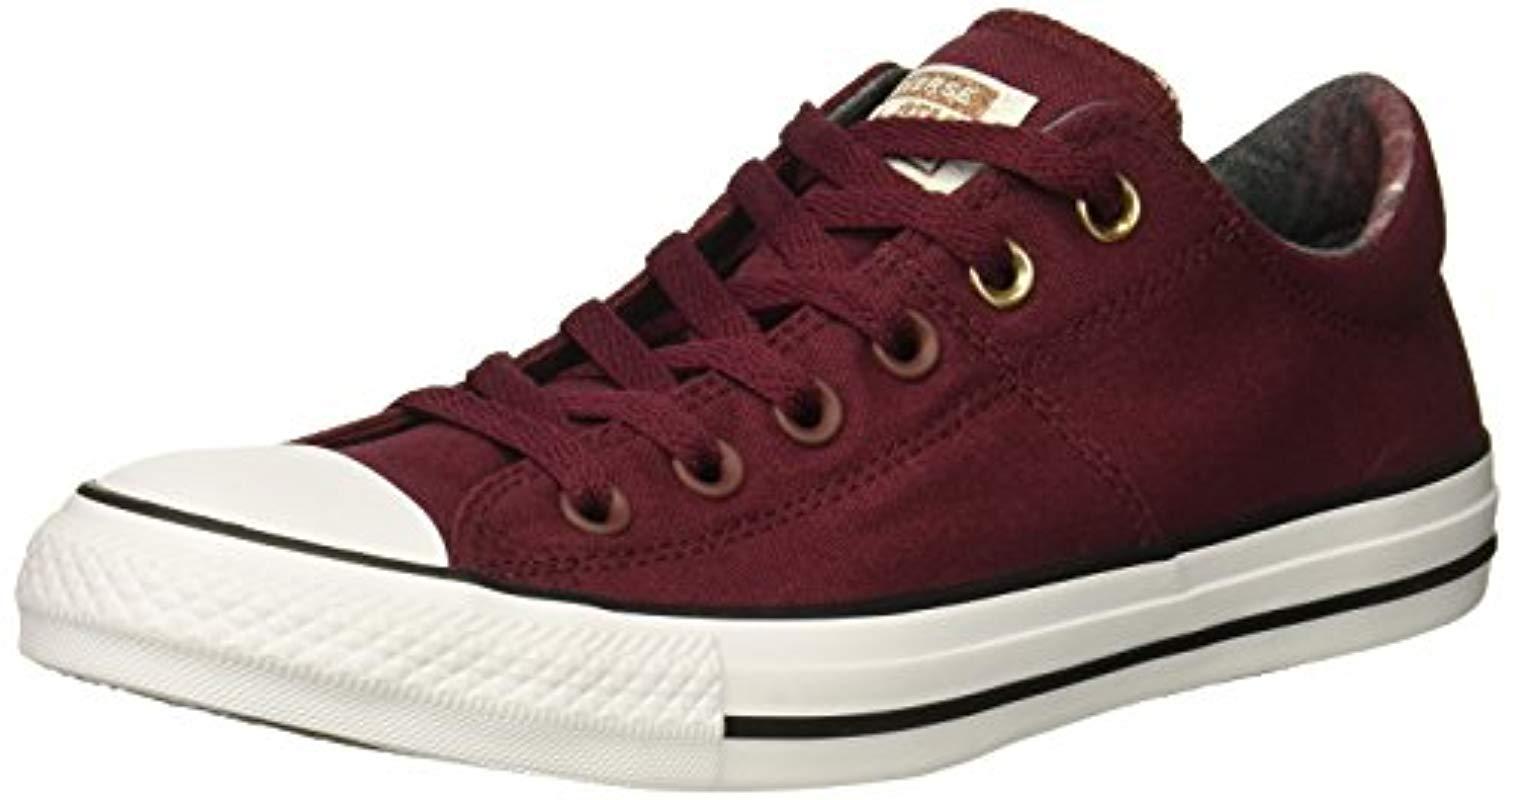 Converse Canvas Chuck Taylor All Star Plaid Lined Madison Low Top Sneaker,  Dark Burgundy/white, 7 M Us | Lyst